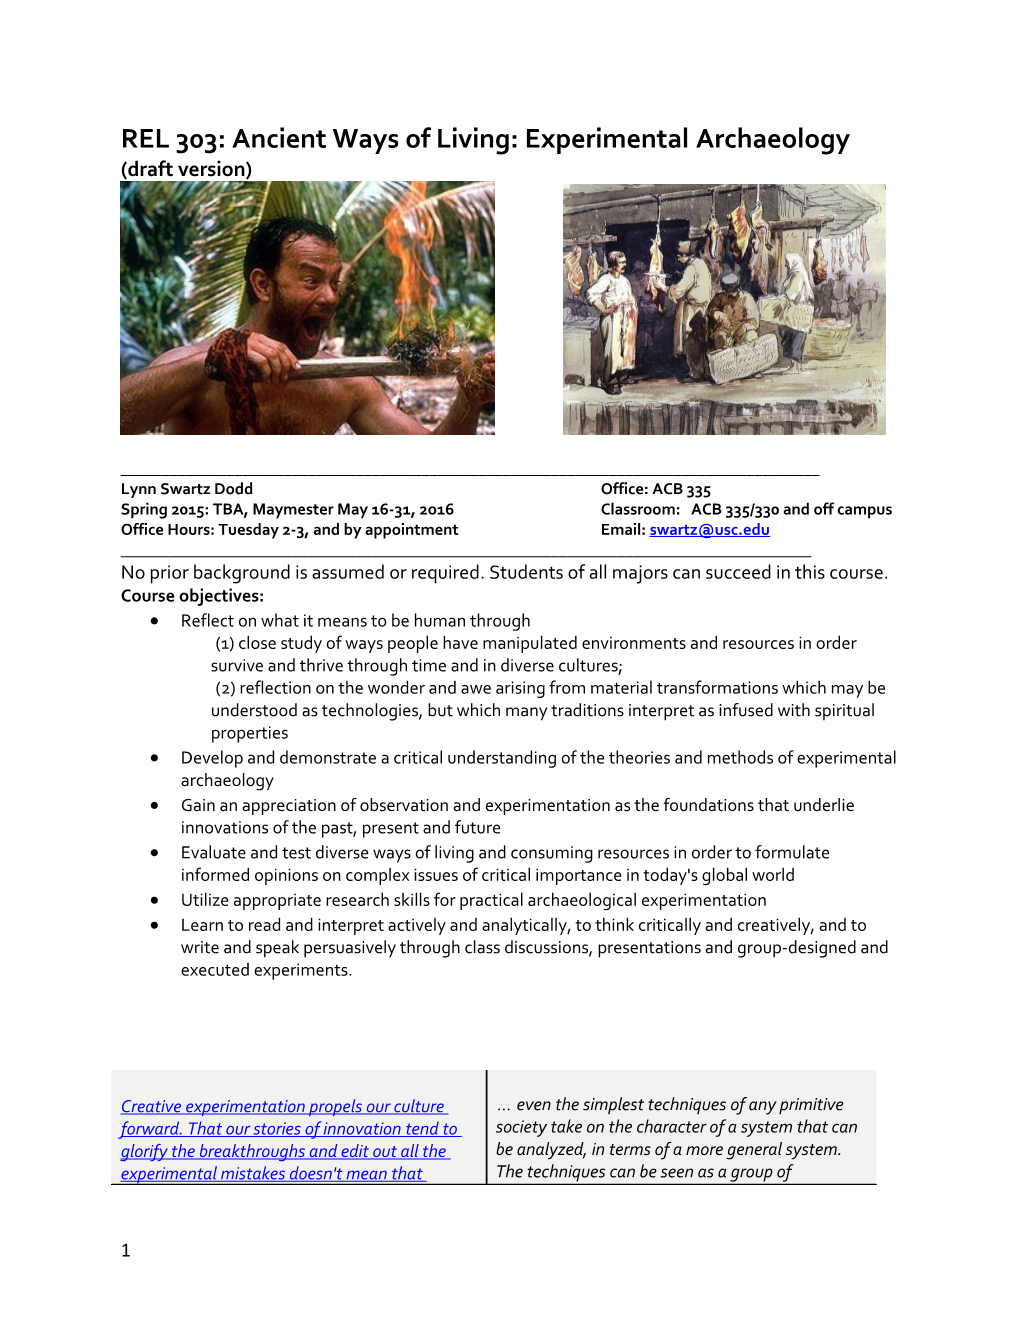 REL 303: Ancient Ways of Living: Experimentalarchaeology (Draft Version)